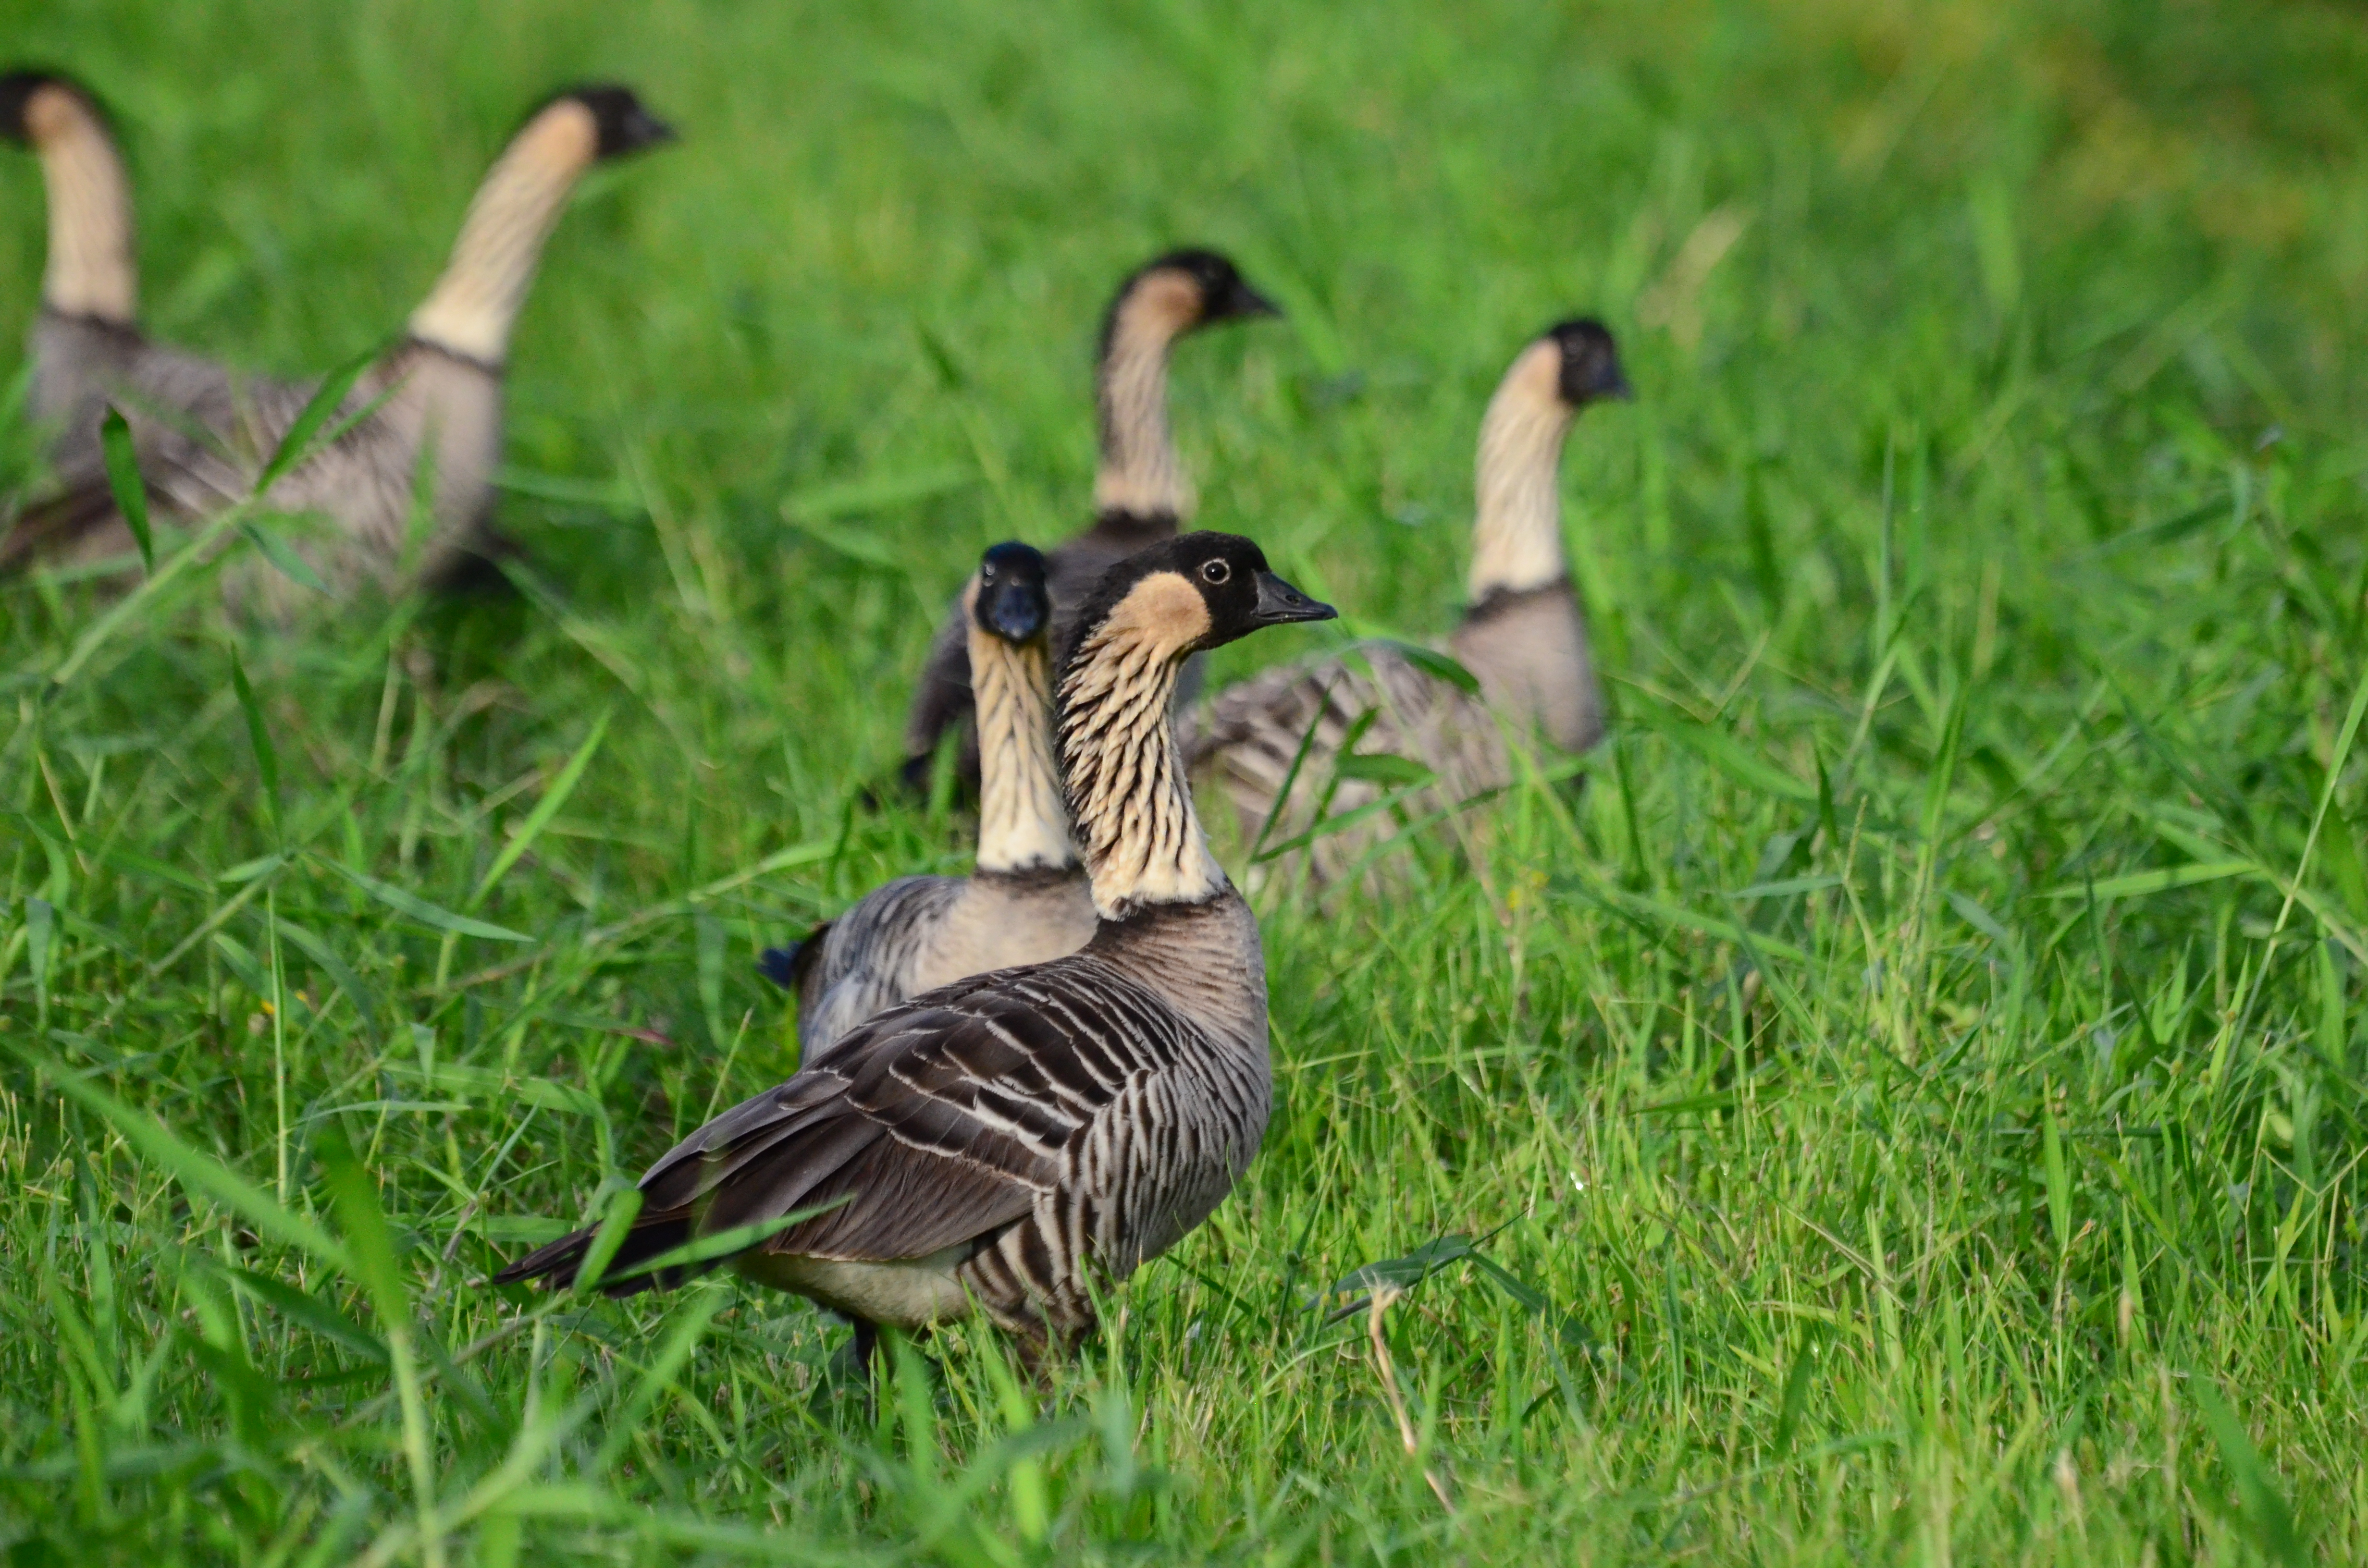 A gaggle of Hawaiian geese hanging out in lush green grass